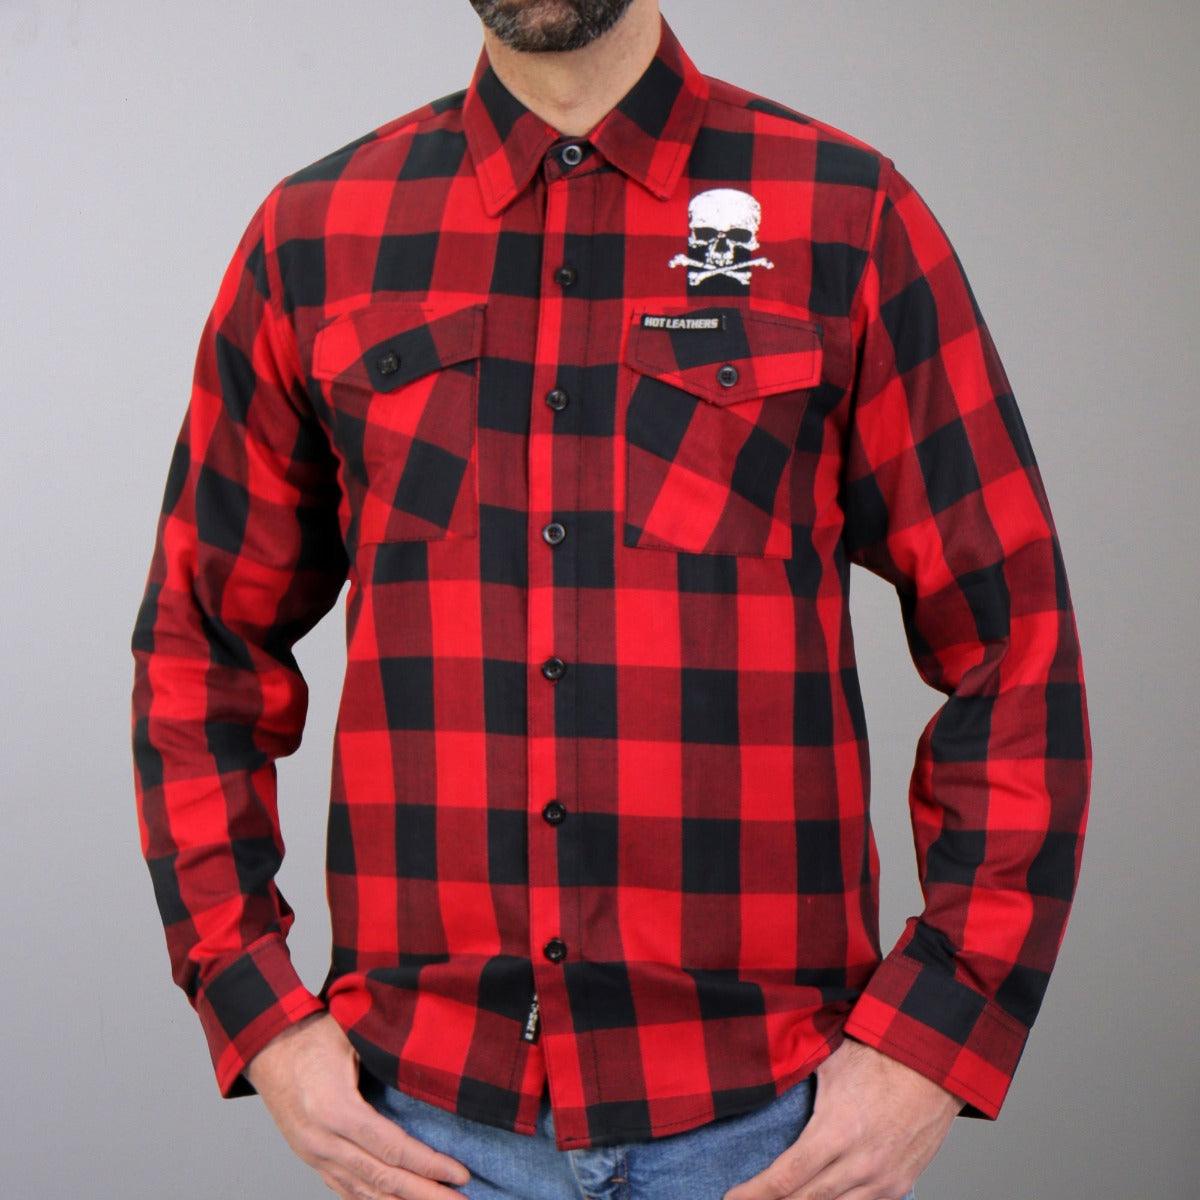 Hot Leathers Men's Black And Red Flannel Long Sleeve Skull Bones - American Legend Rider